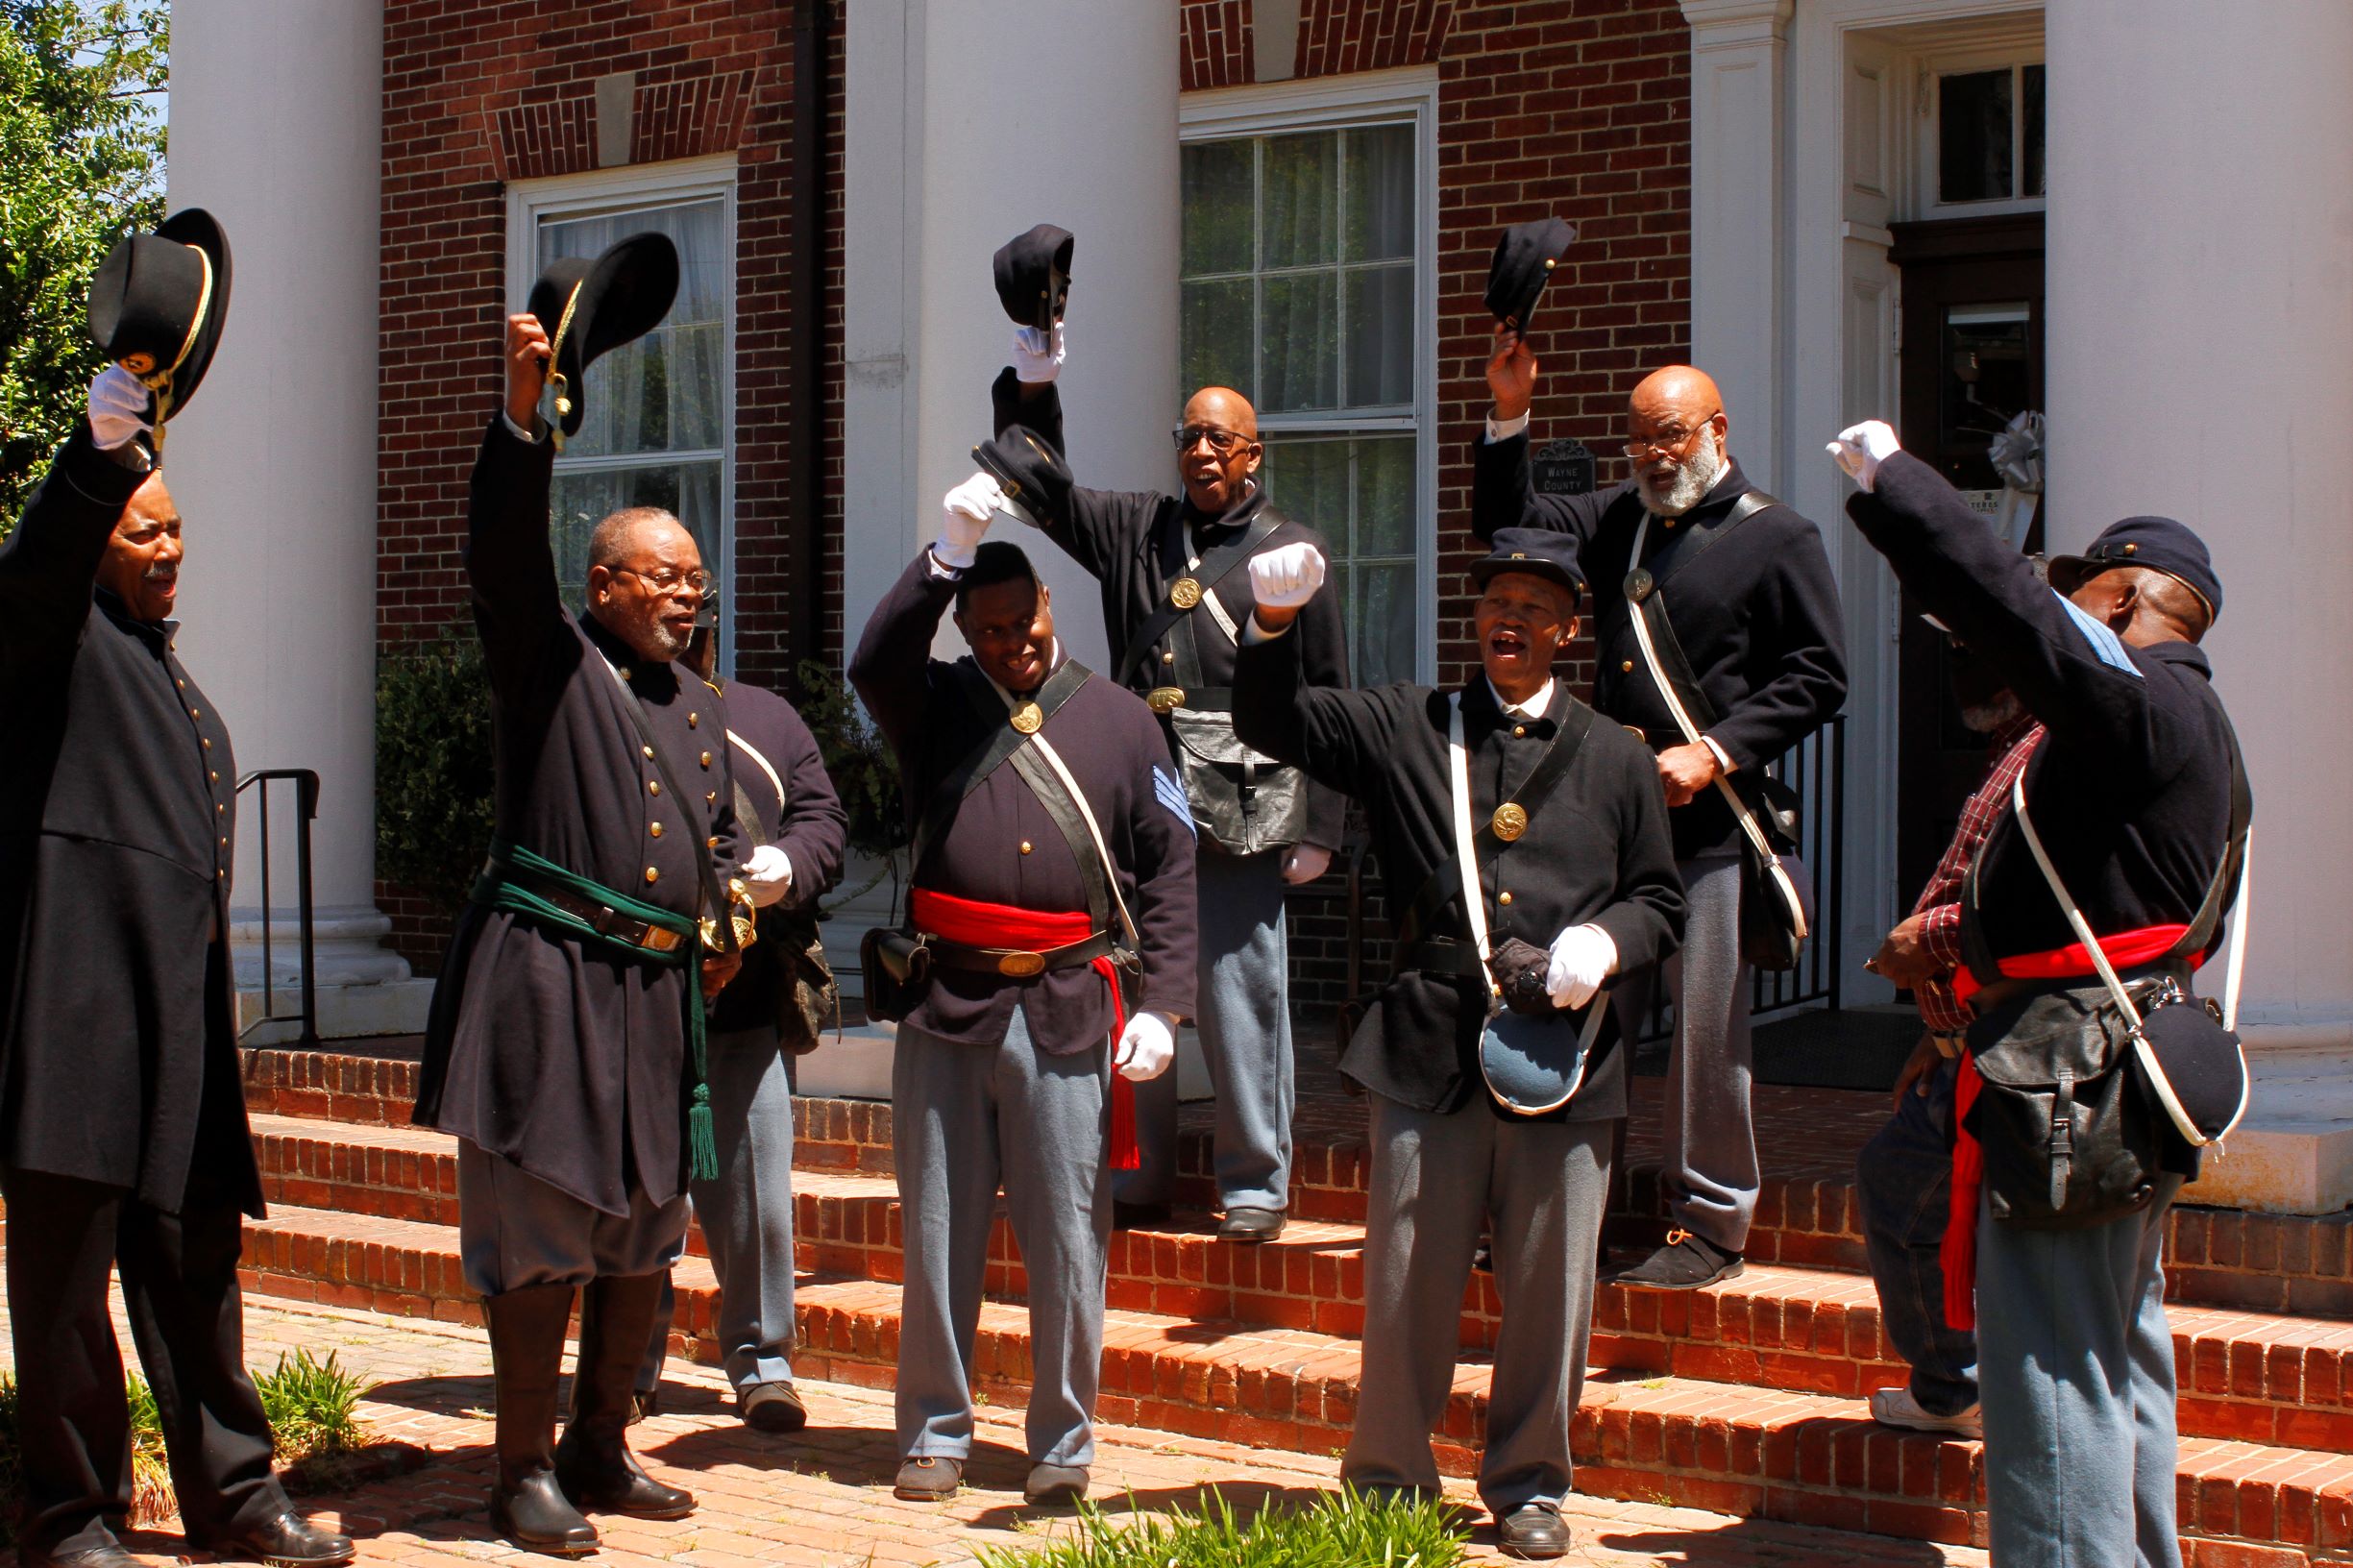 135th USCT Honored As Museum Exhibit Comes To A Close (PHOTO GALLERY)